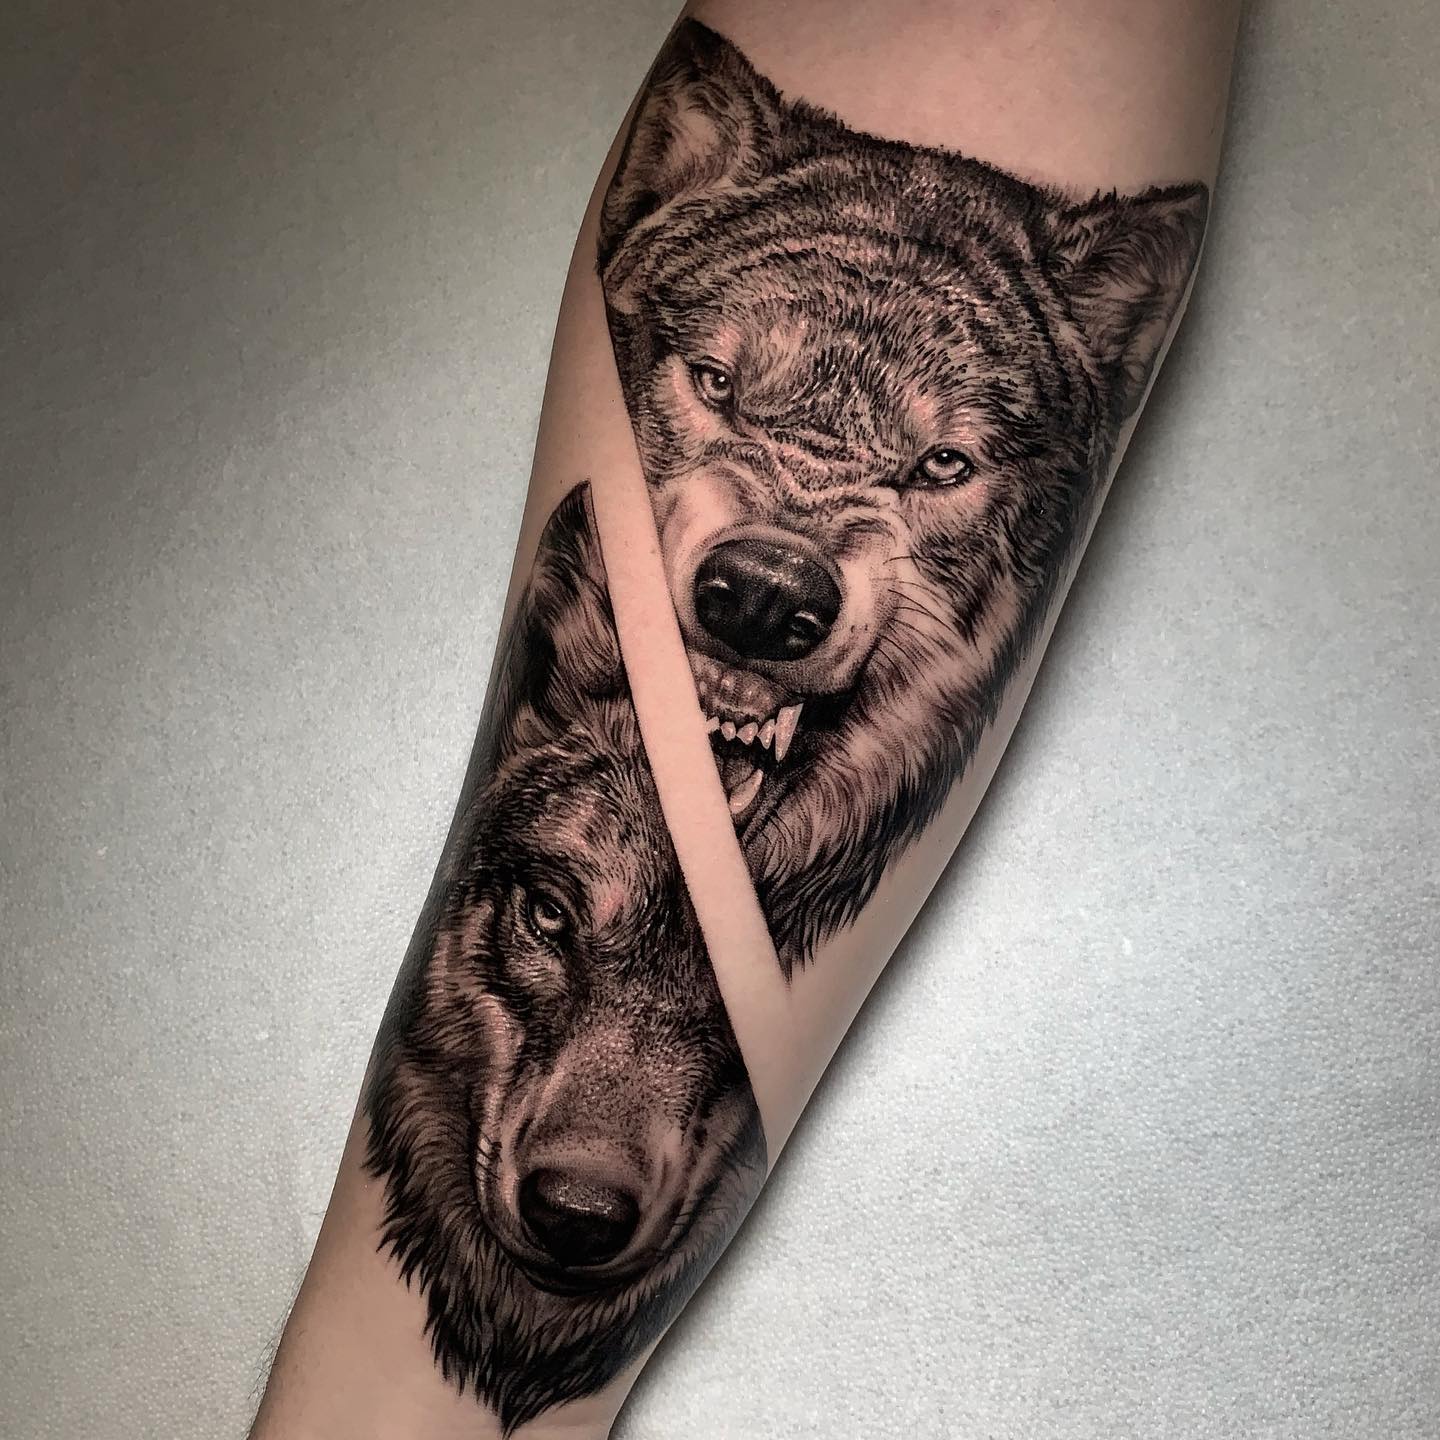 10 Amazing Wolf Tattoo Designs You Need To See!